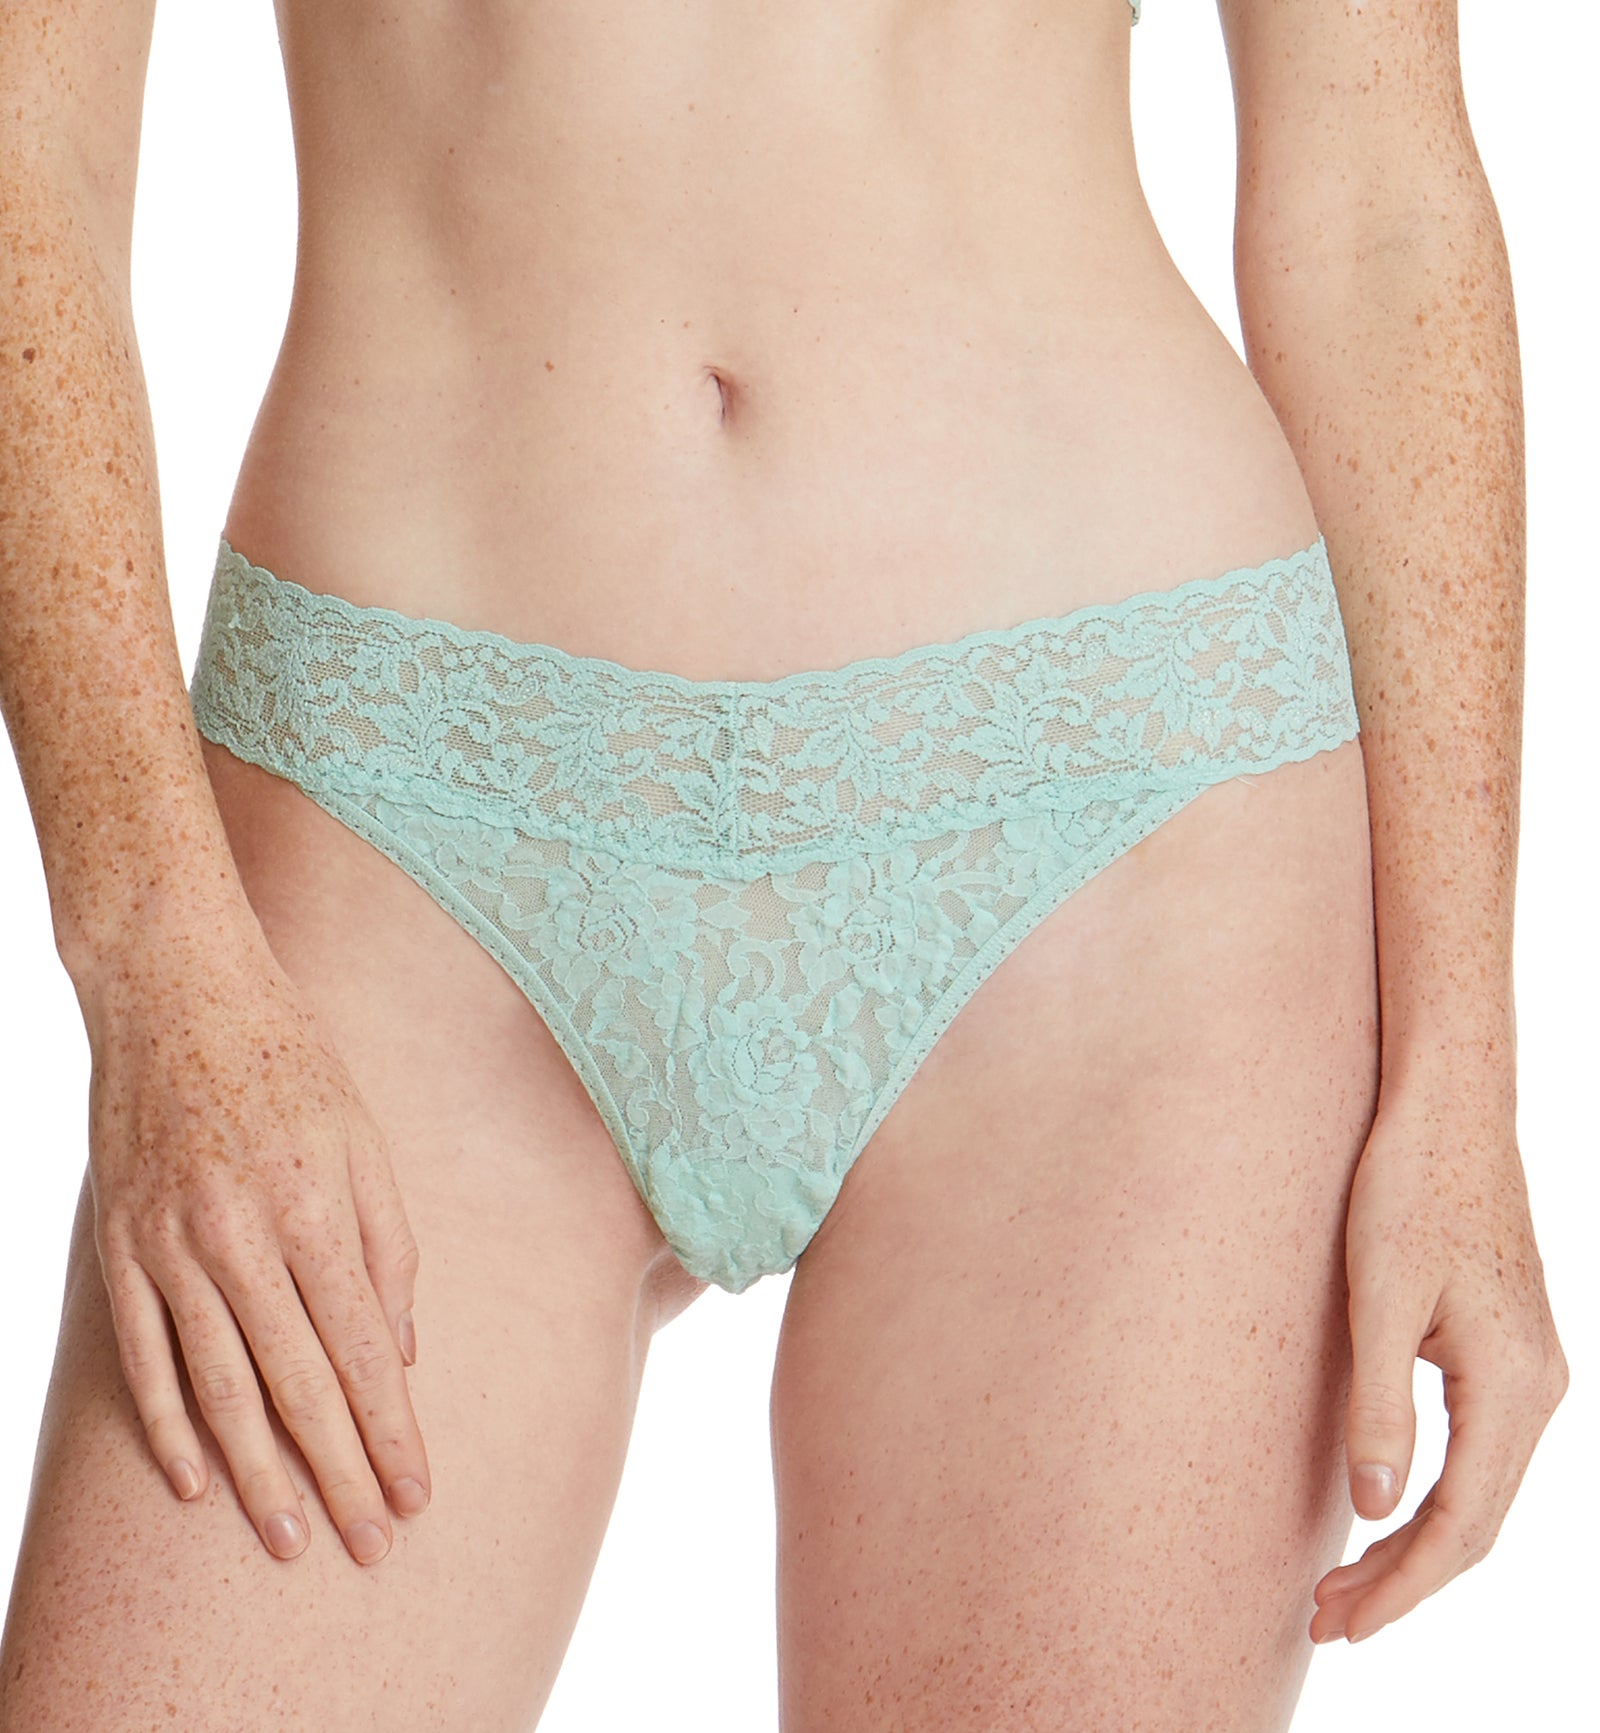 Hanky Panky Signature Lace Original Rise Thong (4811P),Mint Sprig Green - Mint Sprig Green,One Size